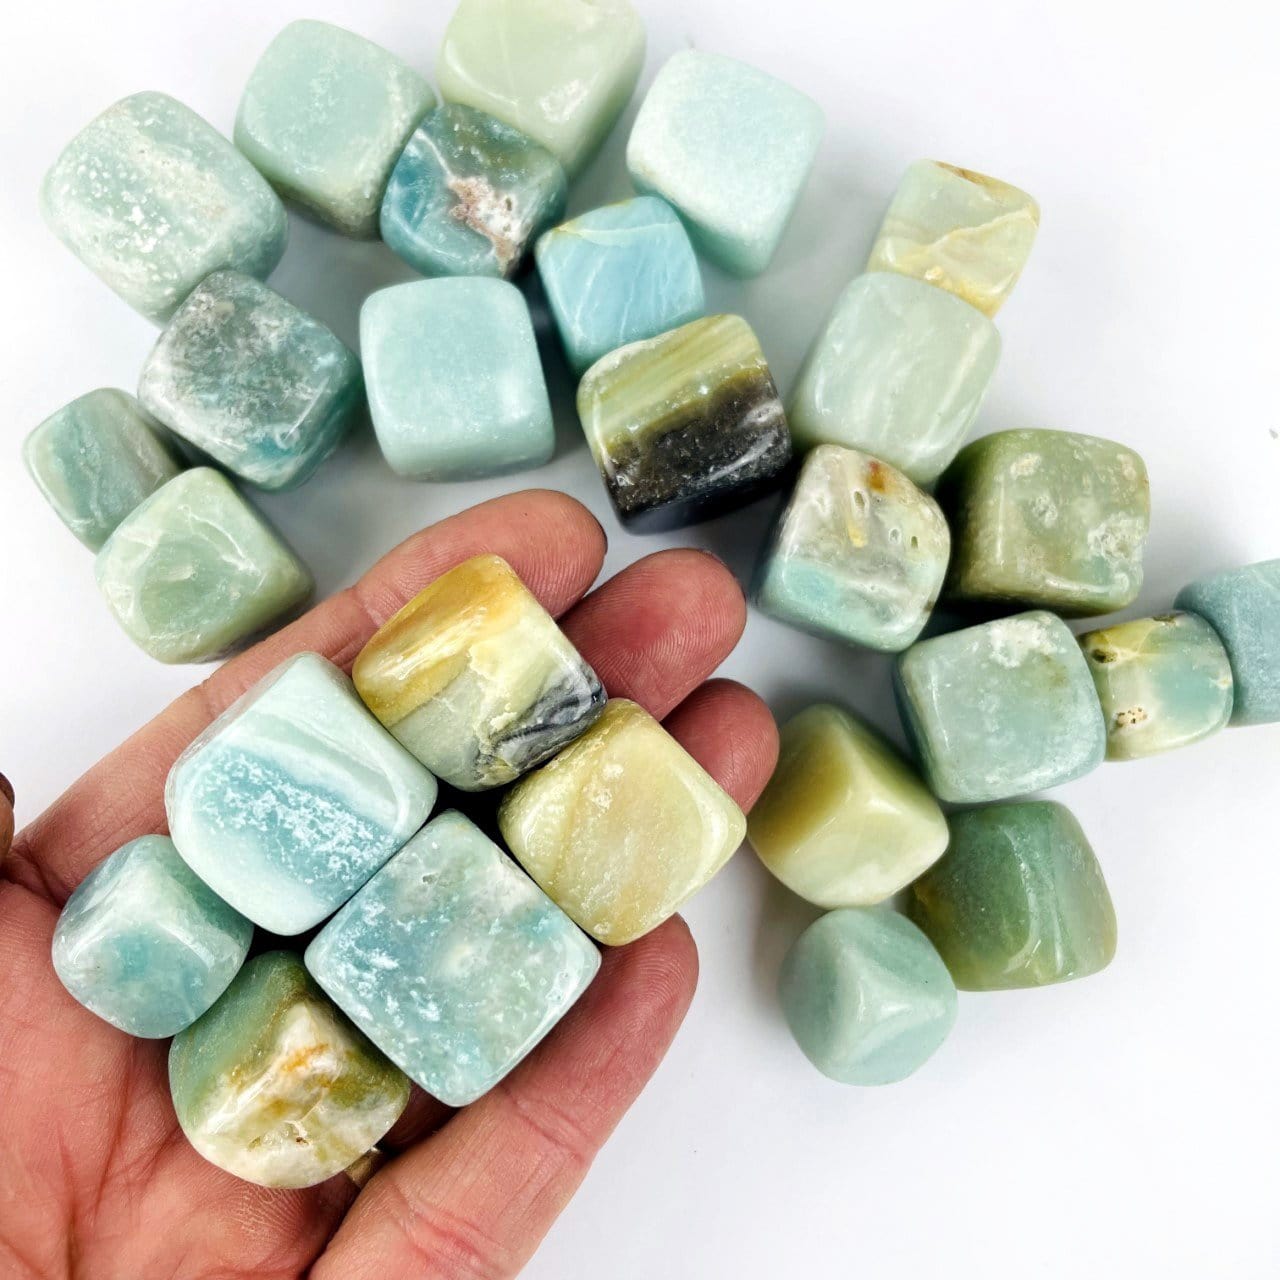 Amazonite cubes being held for size reference, with other cubes in the back ground. 